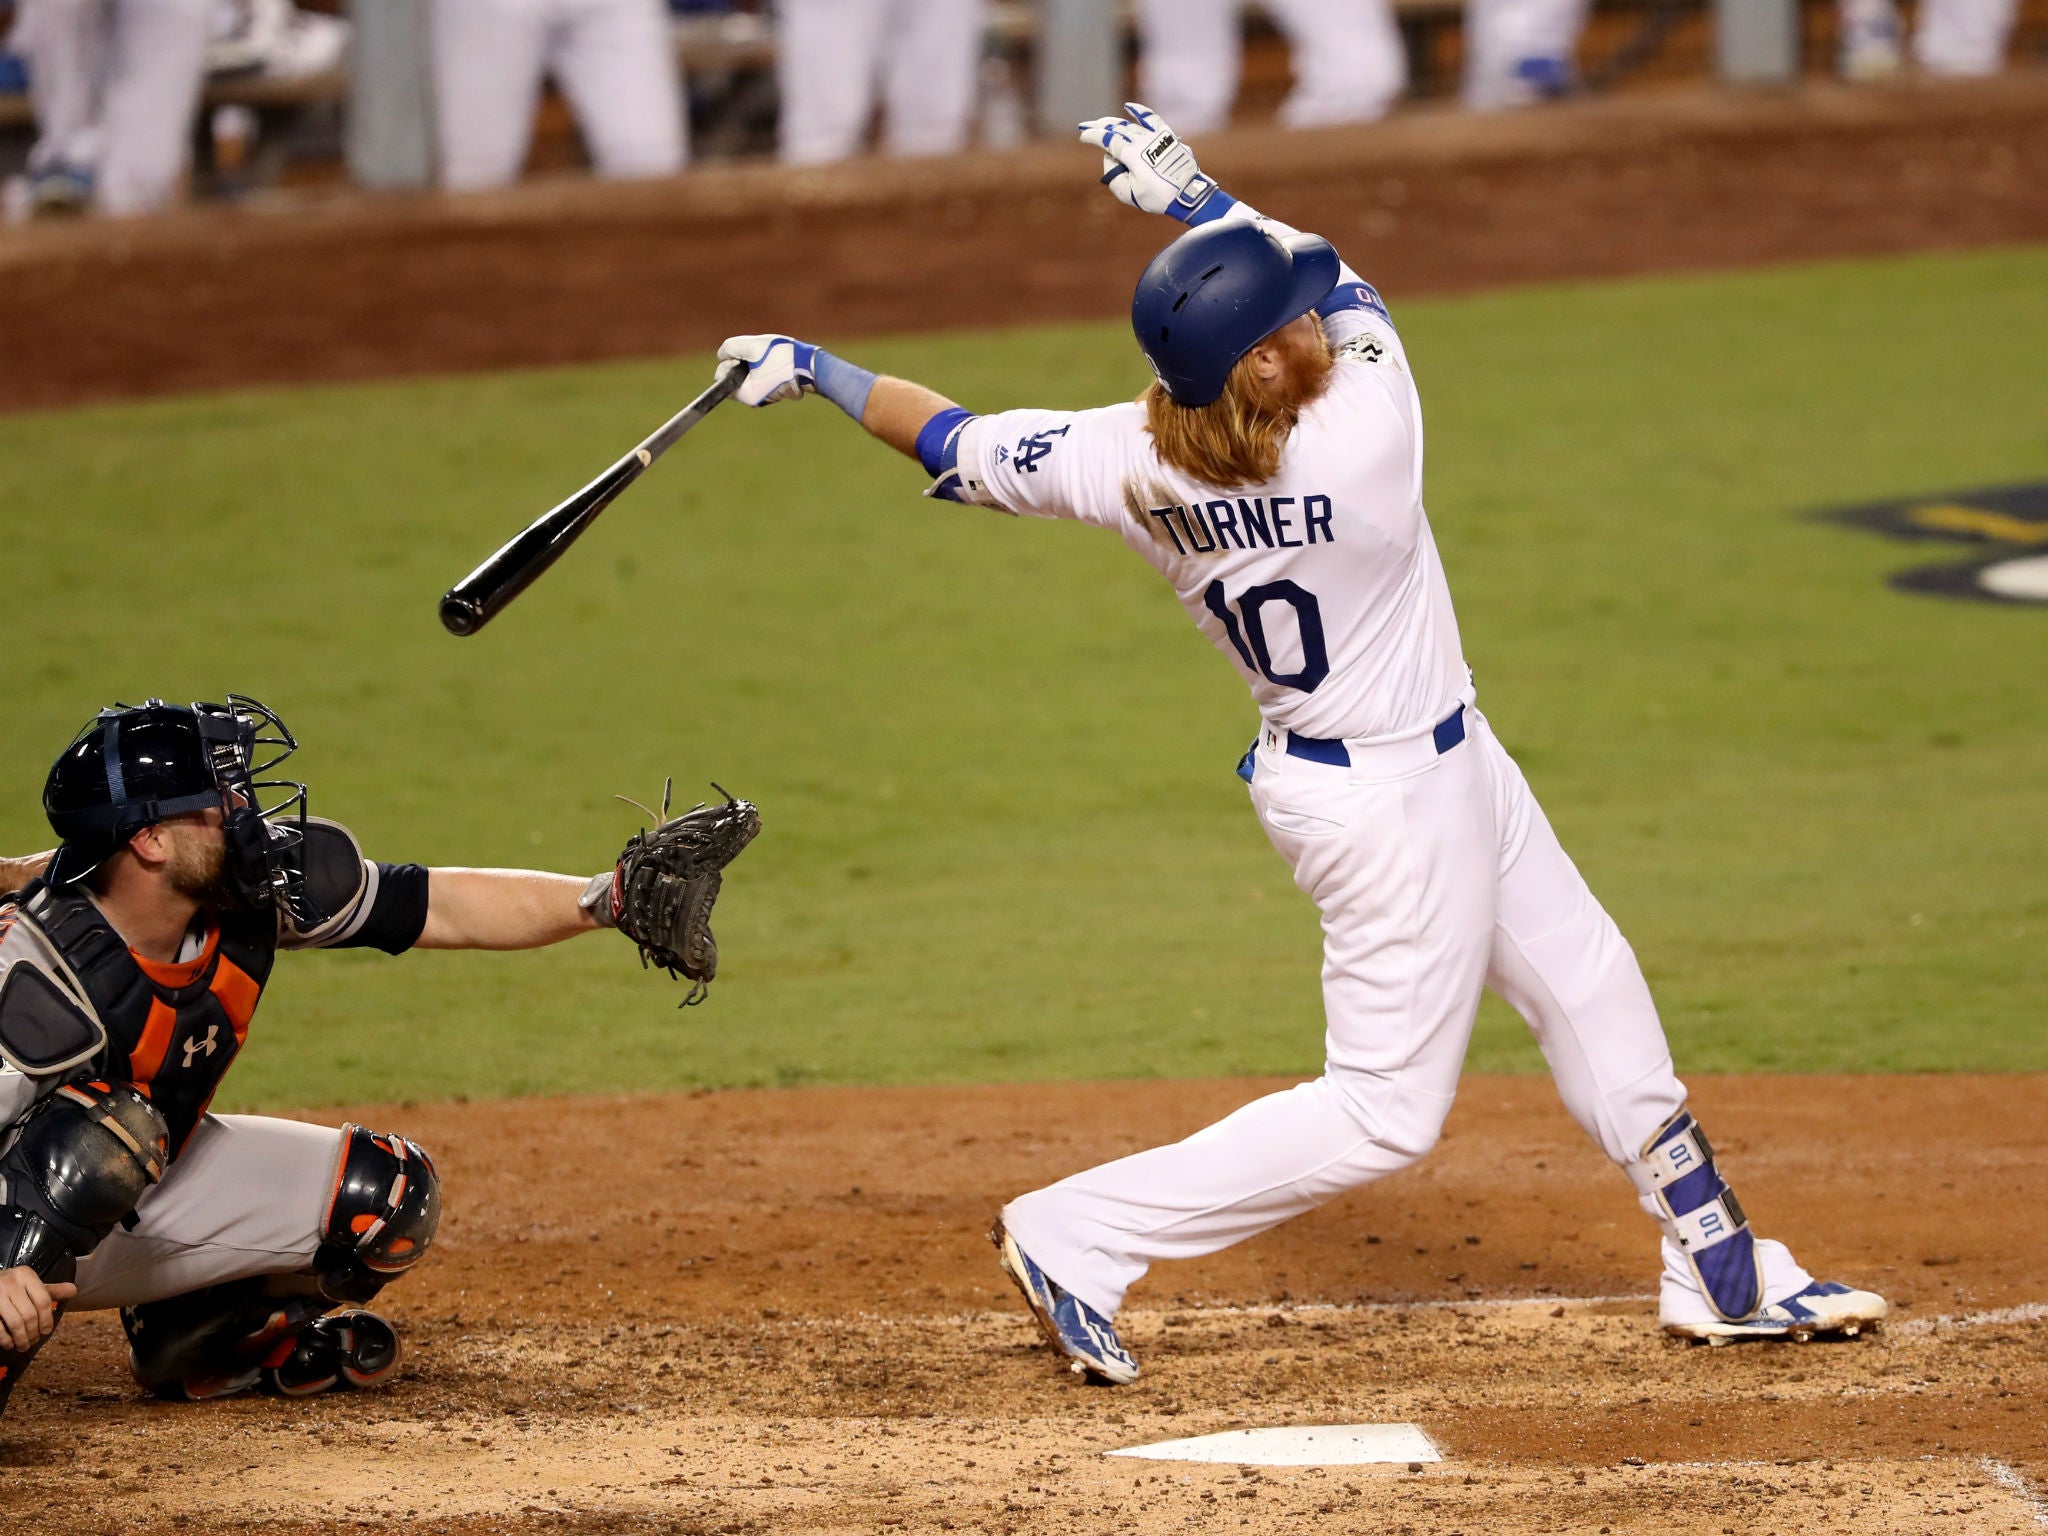 Justin Turner of the Los Angeles Dodgers hit a two-run home run during the sixth inning